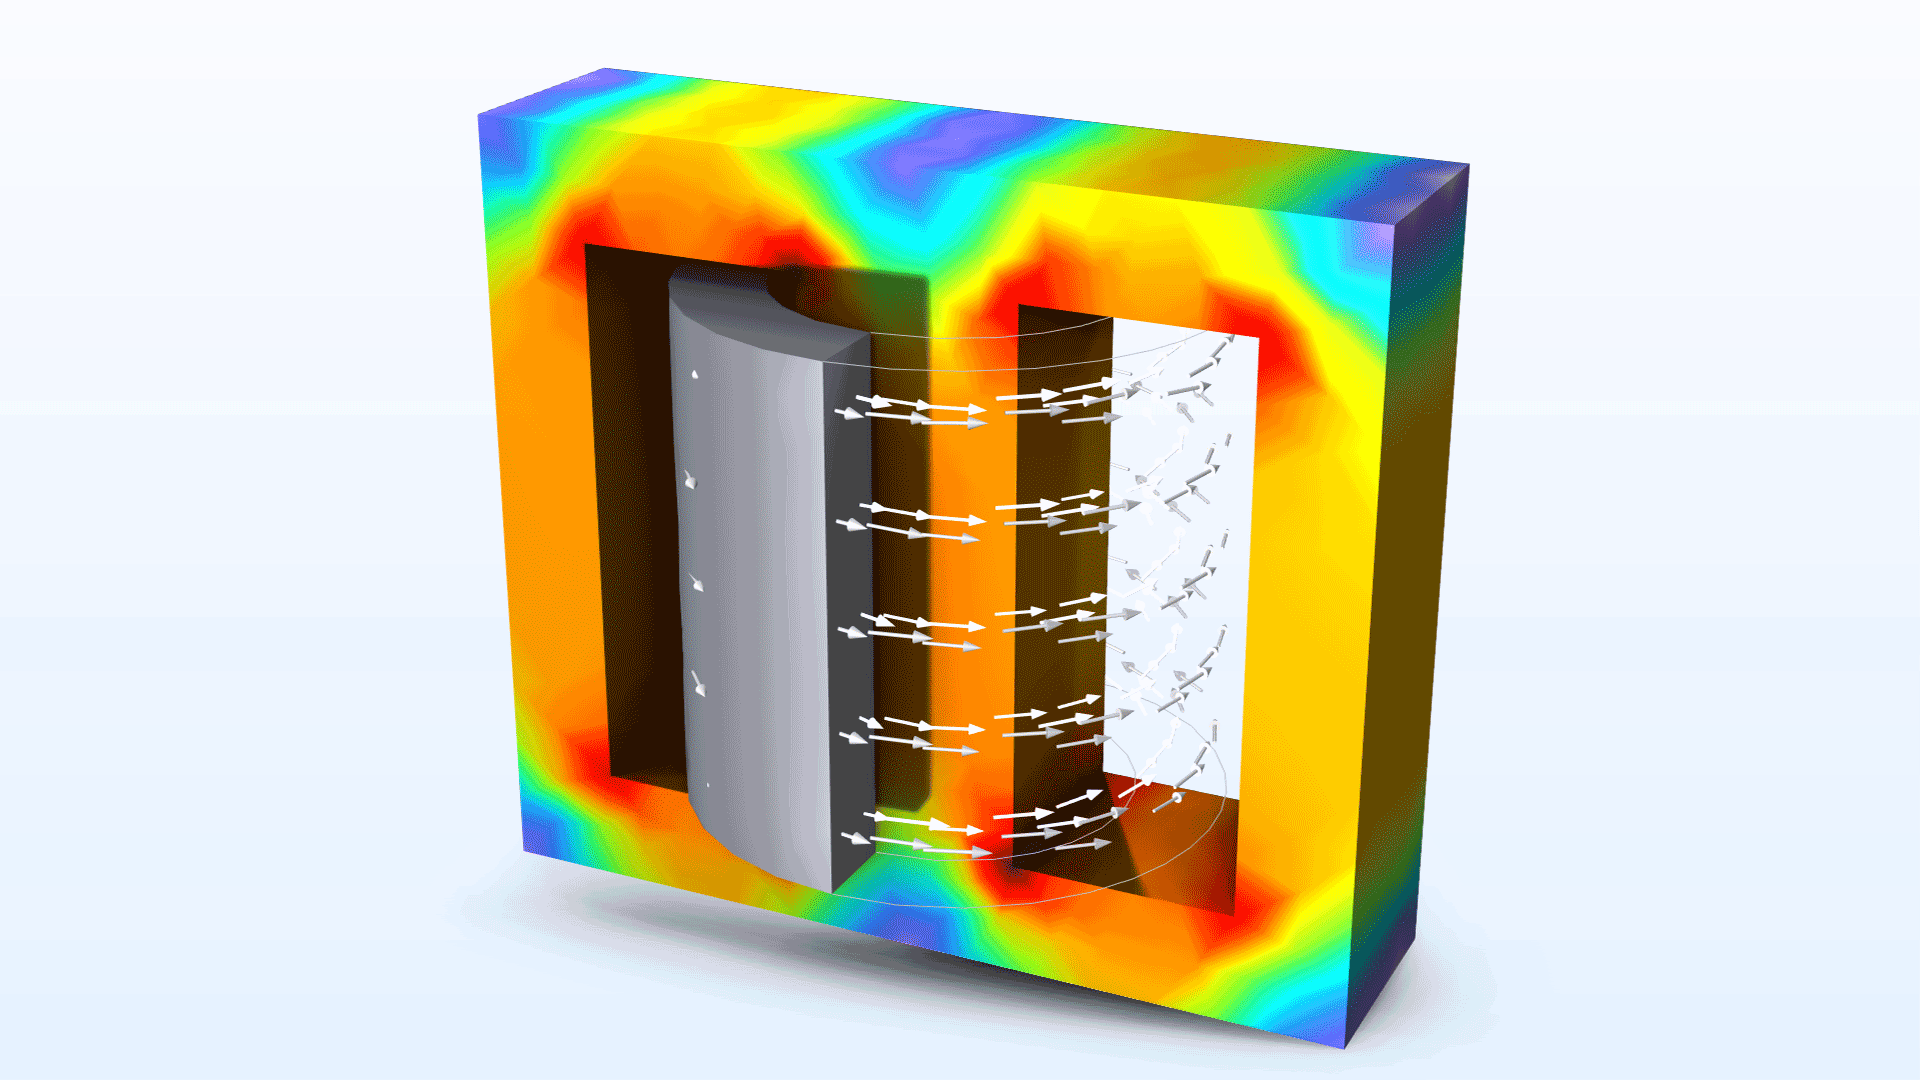 An E-core transformer model in the Rainbow color table with white arrows around the core.